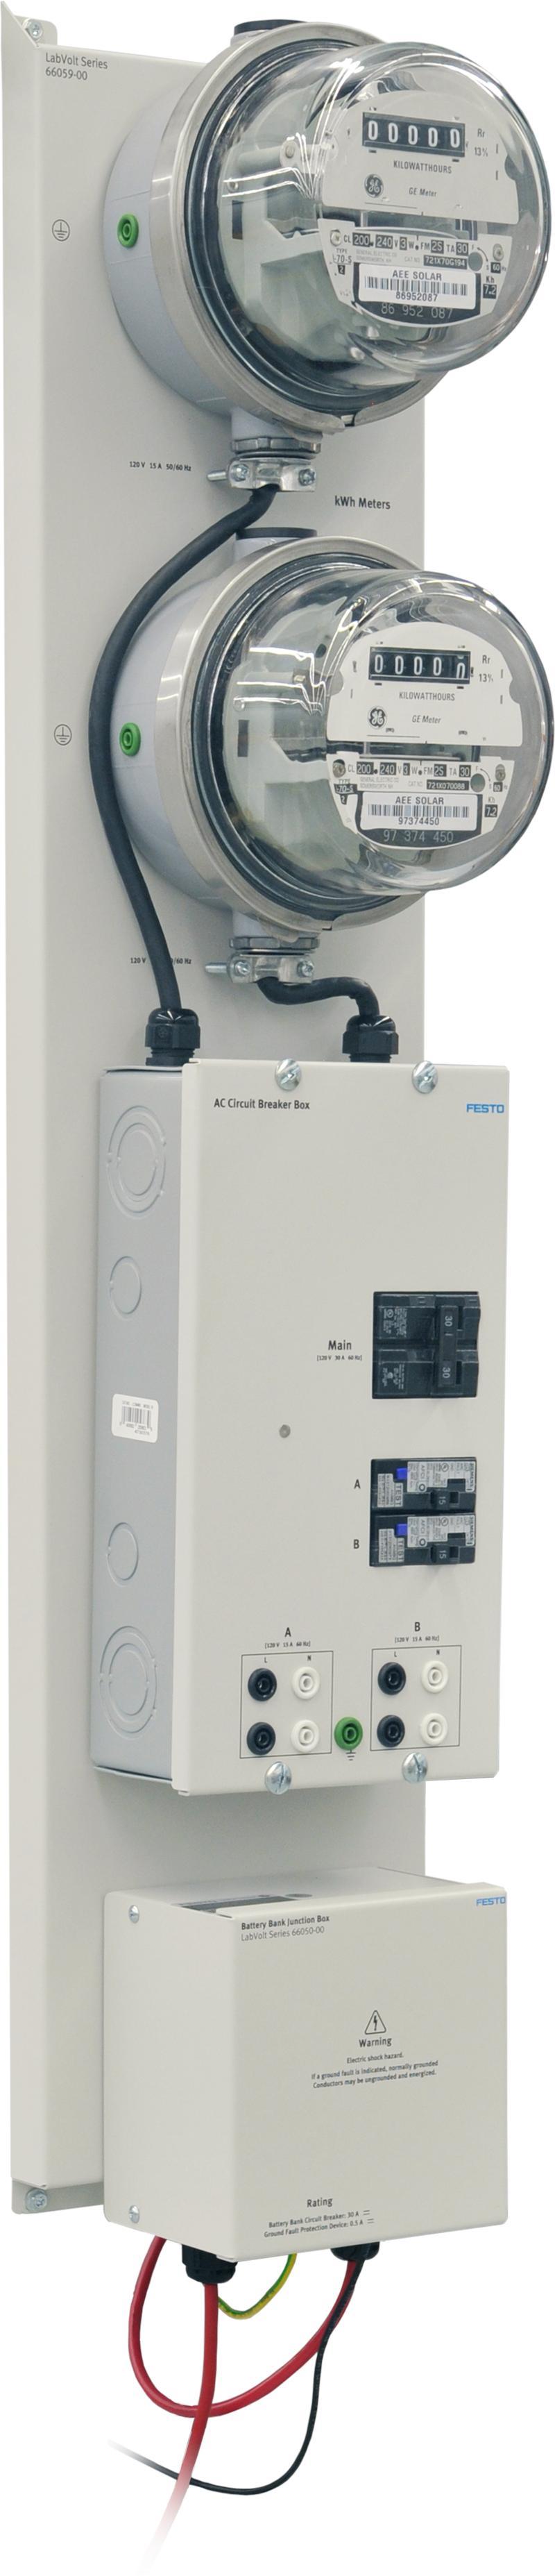 kwh Meters with AC Circuit Breaker Box 580063 (66059-00) The kwh Meters with AC Circuit Breaker Box consists of two kwh meters and a circuit-breaker box.